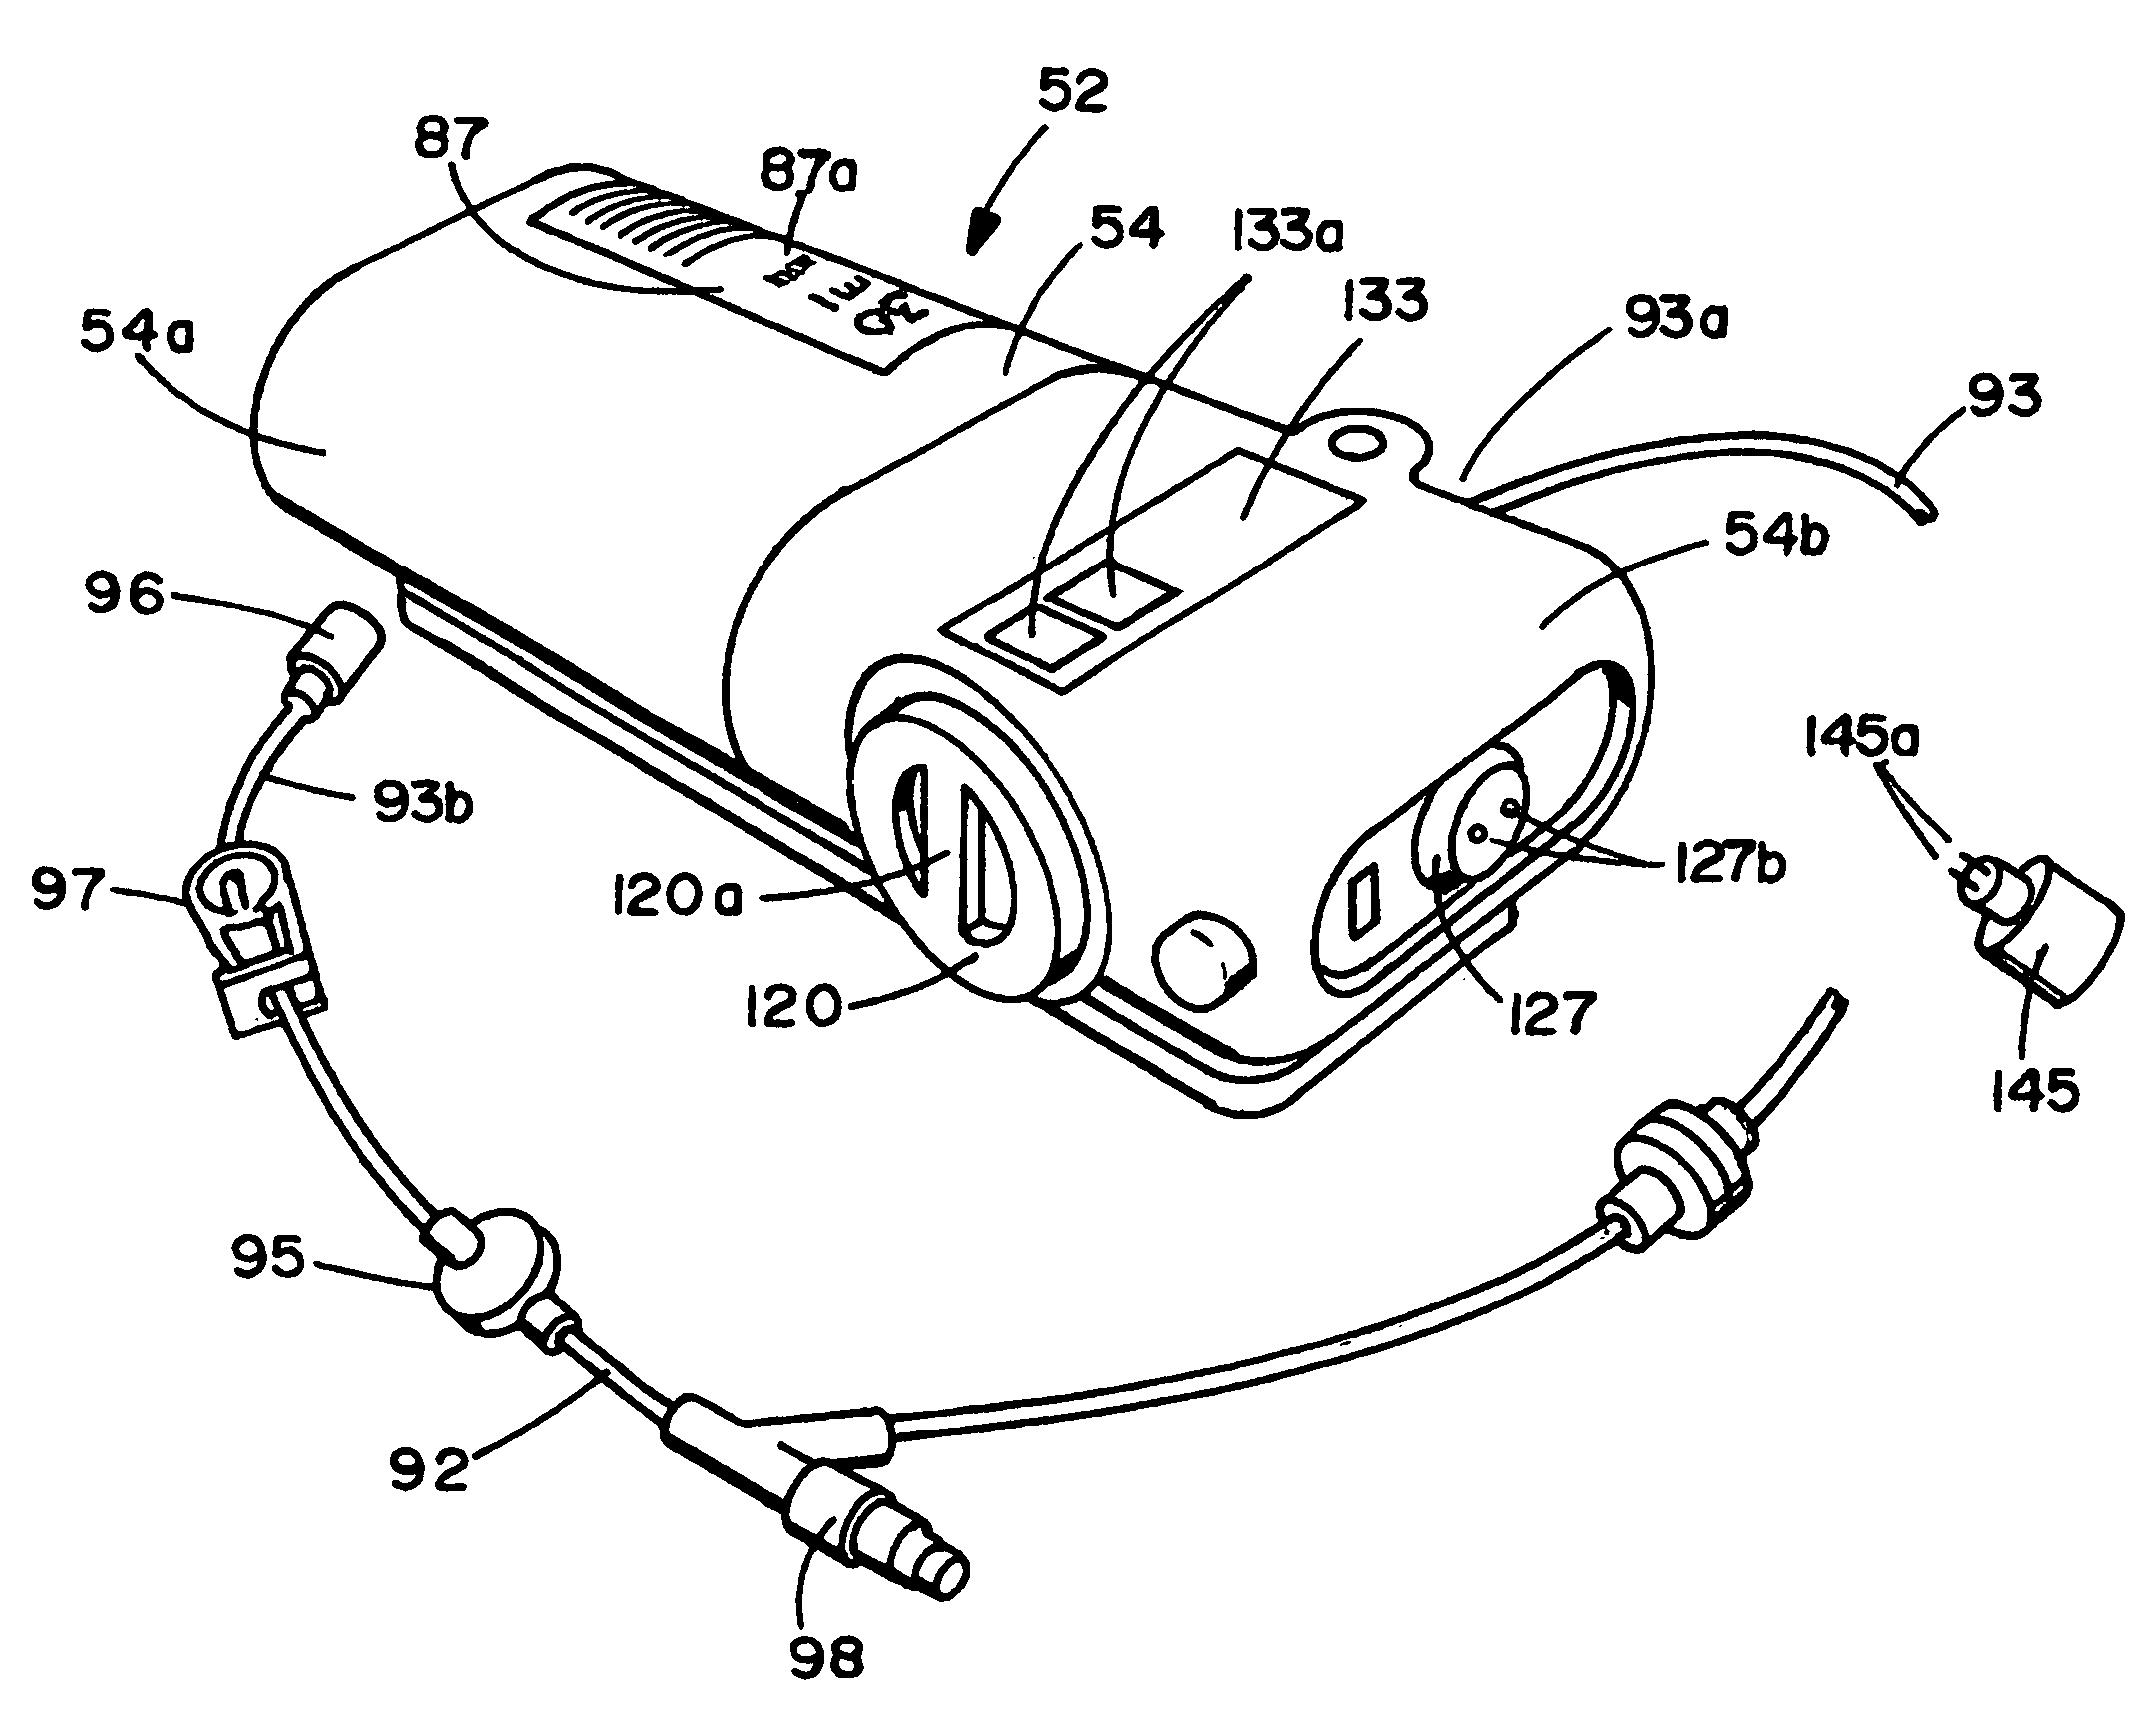 Fluid delivery apparatus with vial fill